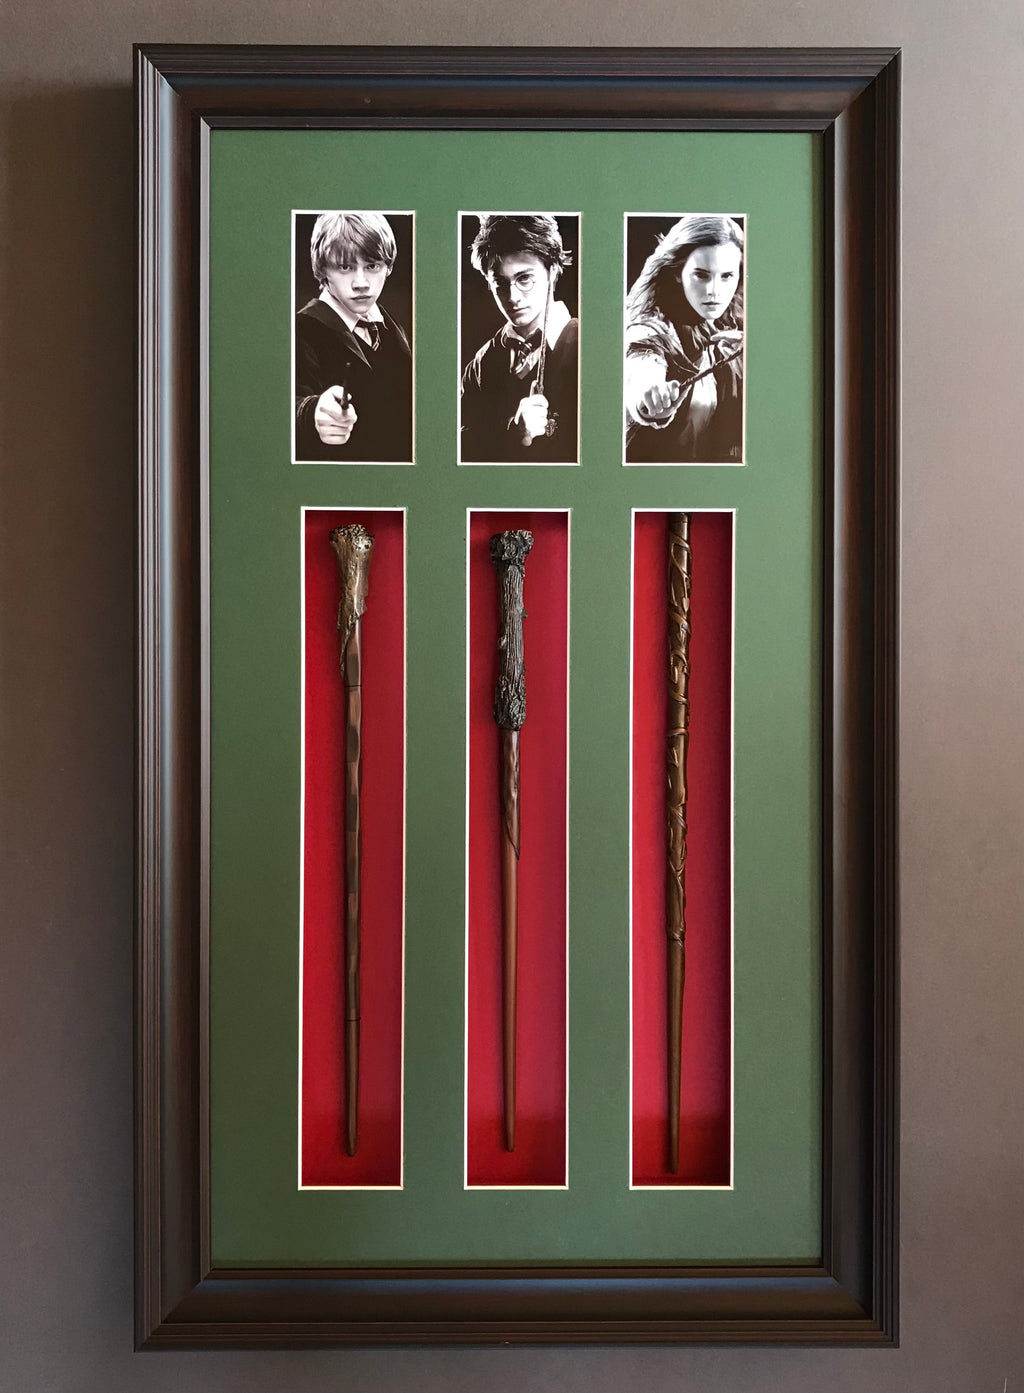 Harry Potter - A Framed Replica Wand Display